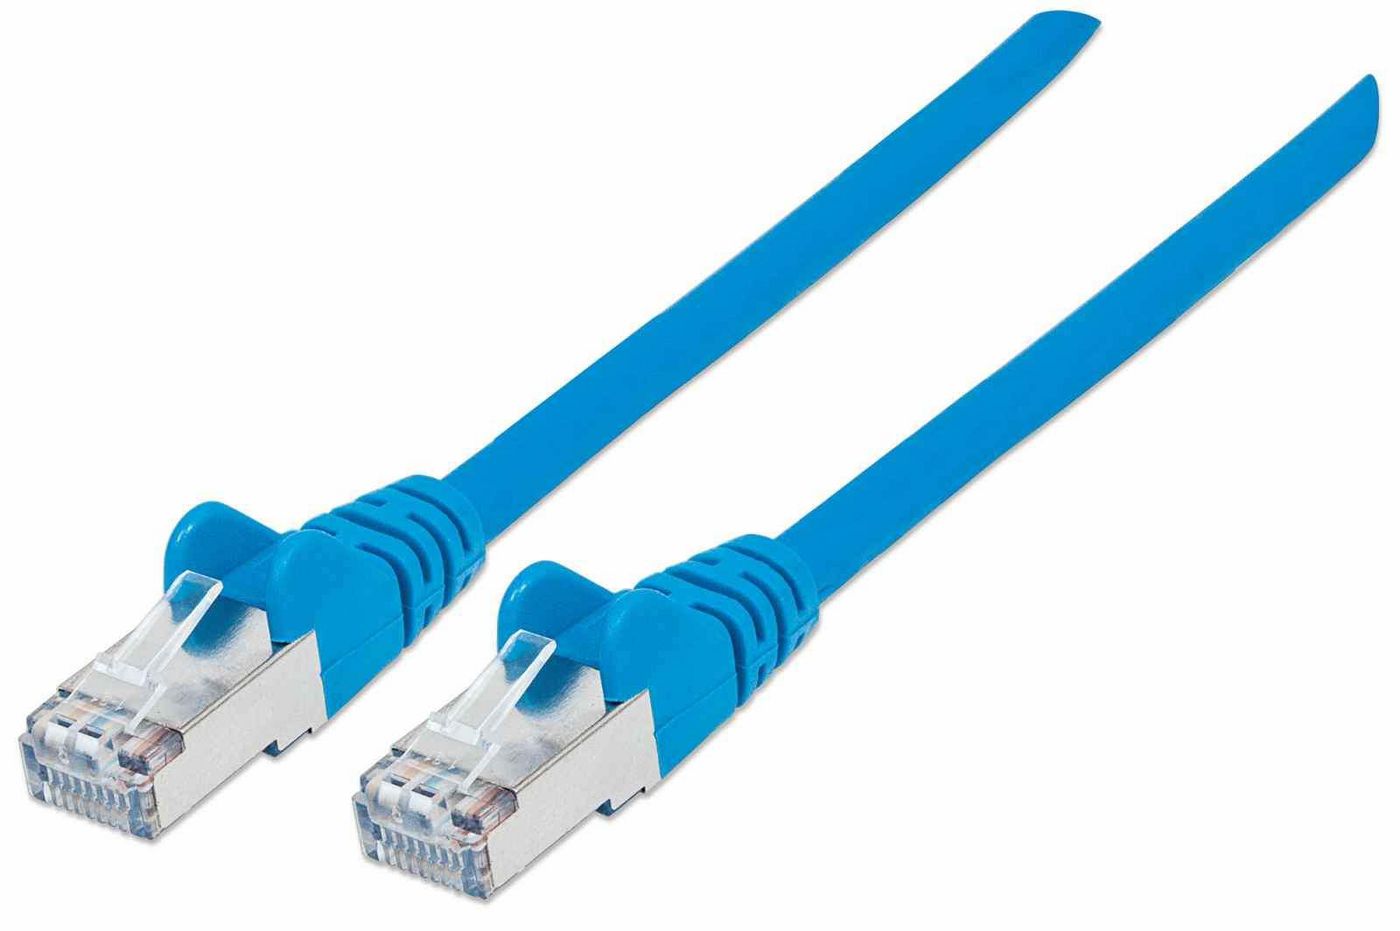 Intellinet 741088 High Performance Network Cable 